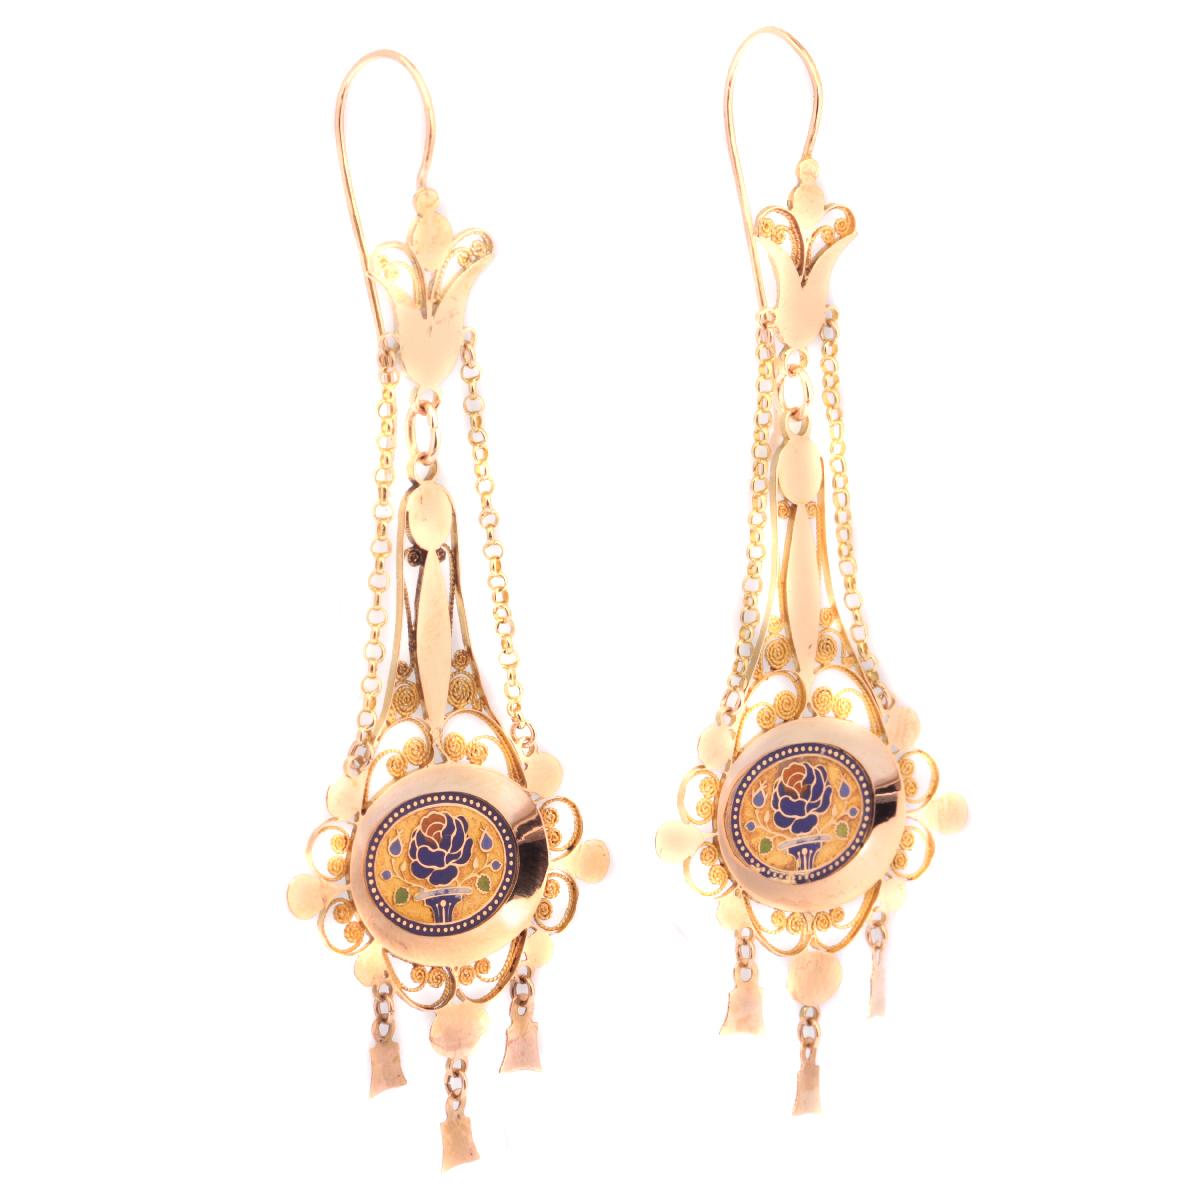 Early Victorian Antique Gold Pendent Earrings with Filigree and Enamel, Early 19th Century